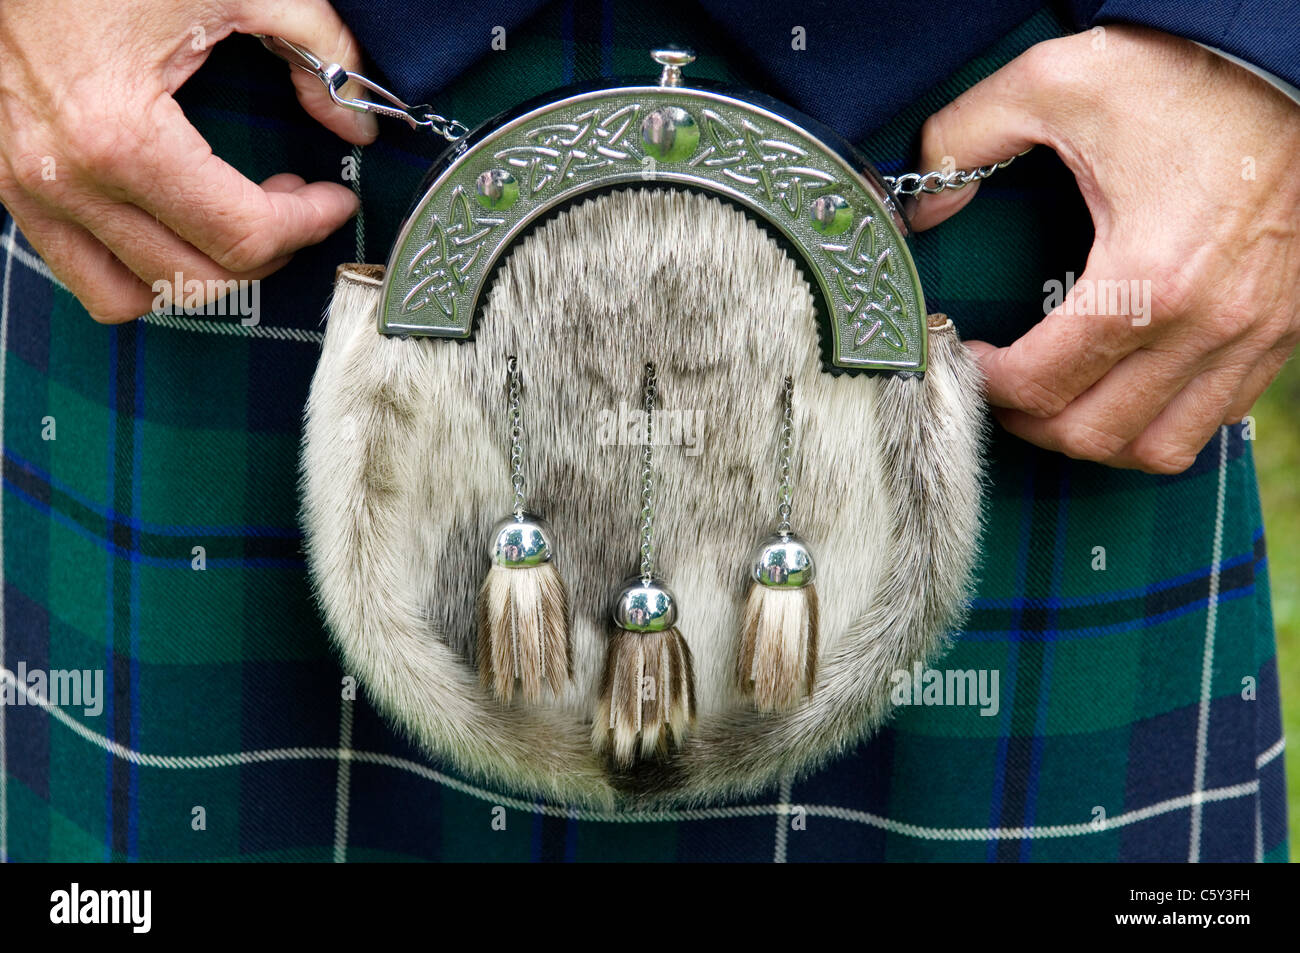 A sporran, a purse or pouch worn around the waist over a kilt. Part of male traditional Scottish national dress costume Stock Photo